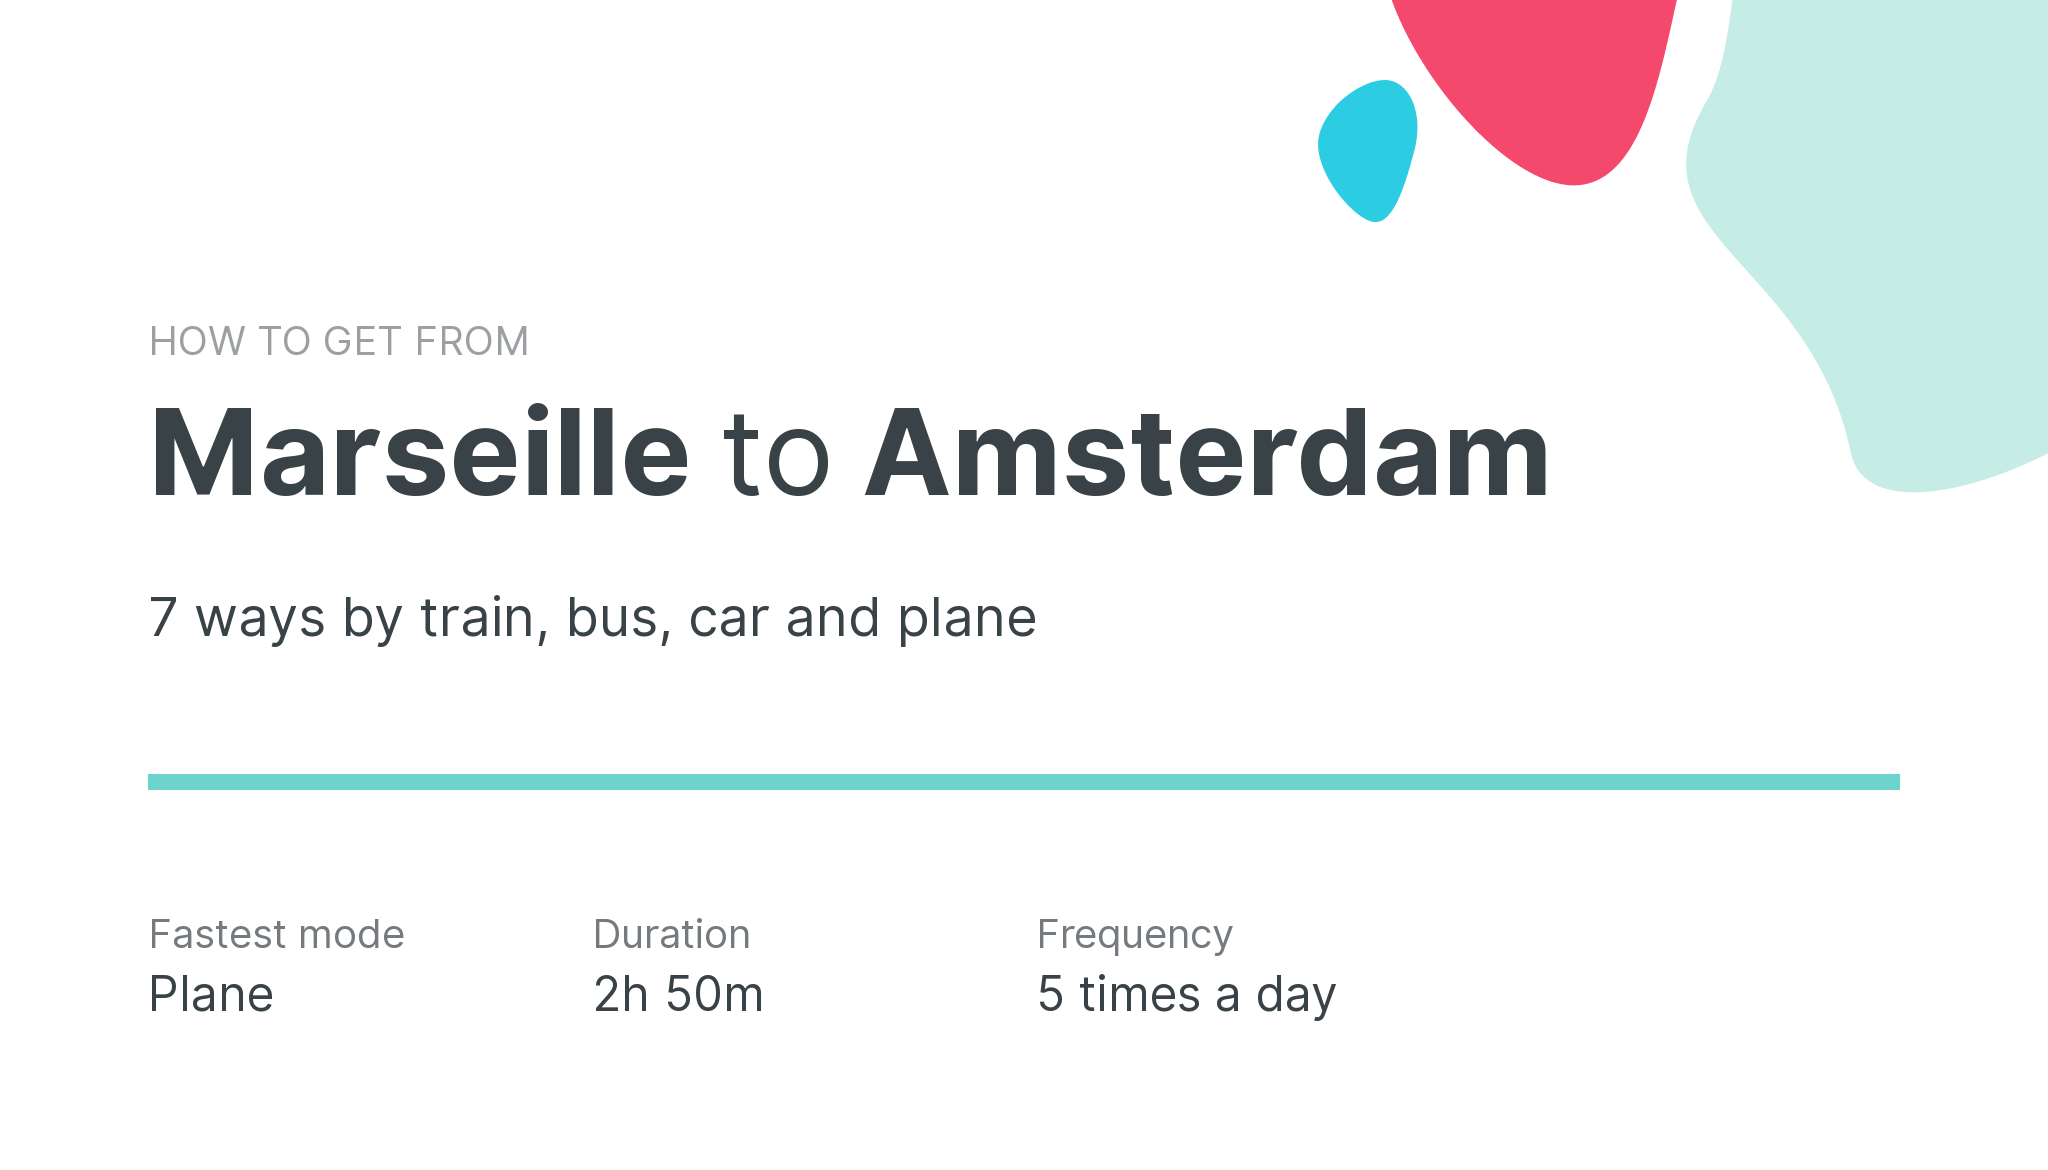 How do I get from Marseille to Amsterdam